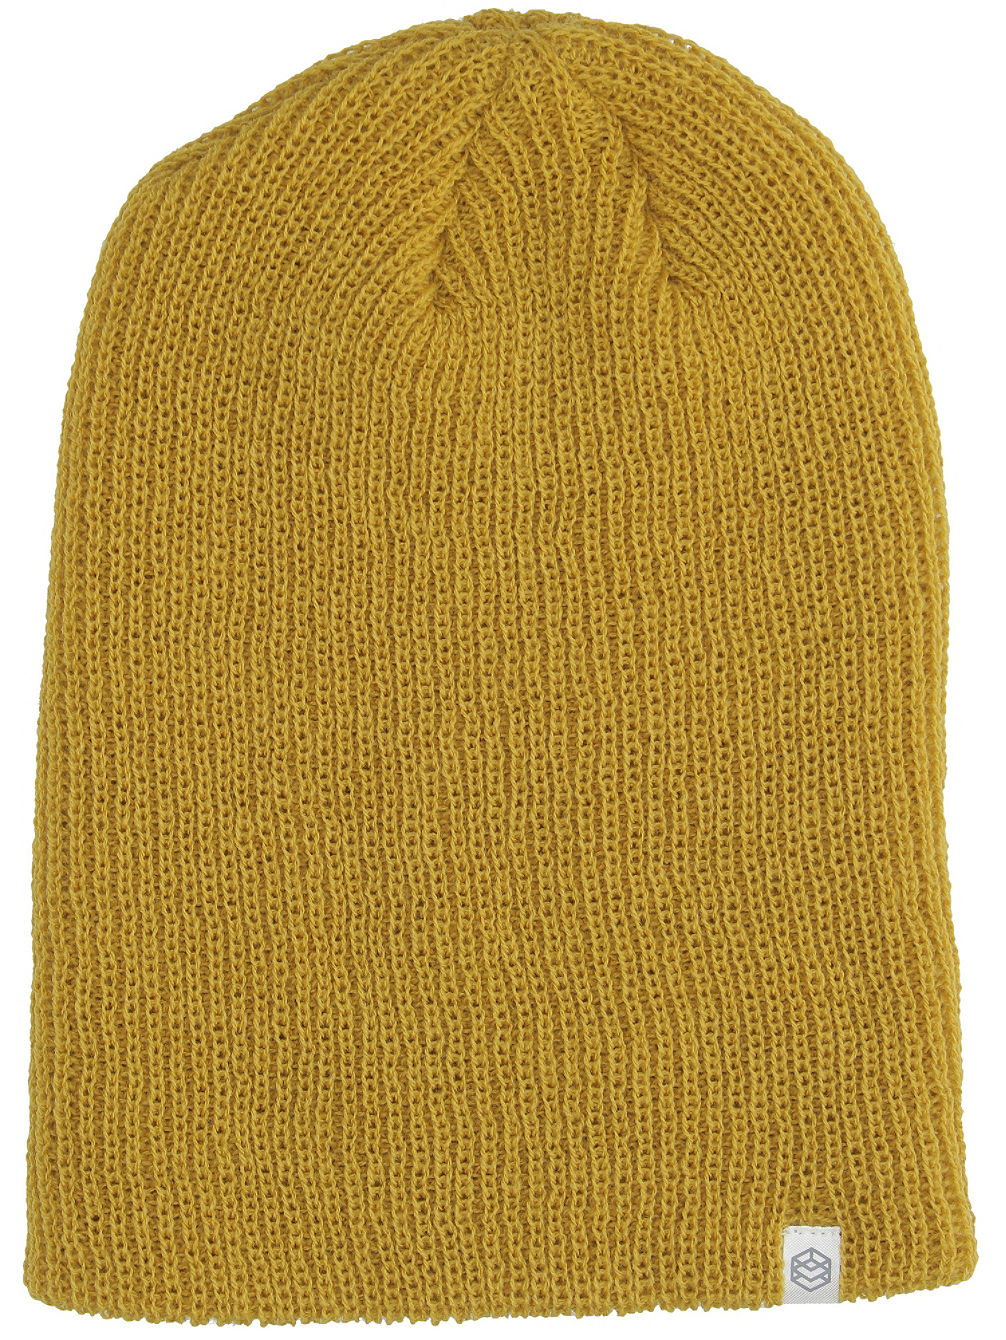 Toque Knit Slouch Muts